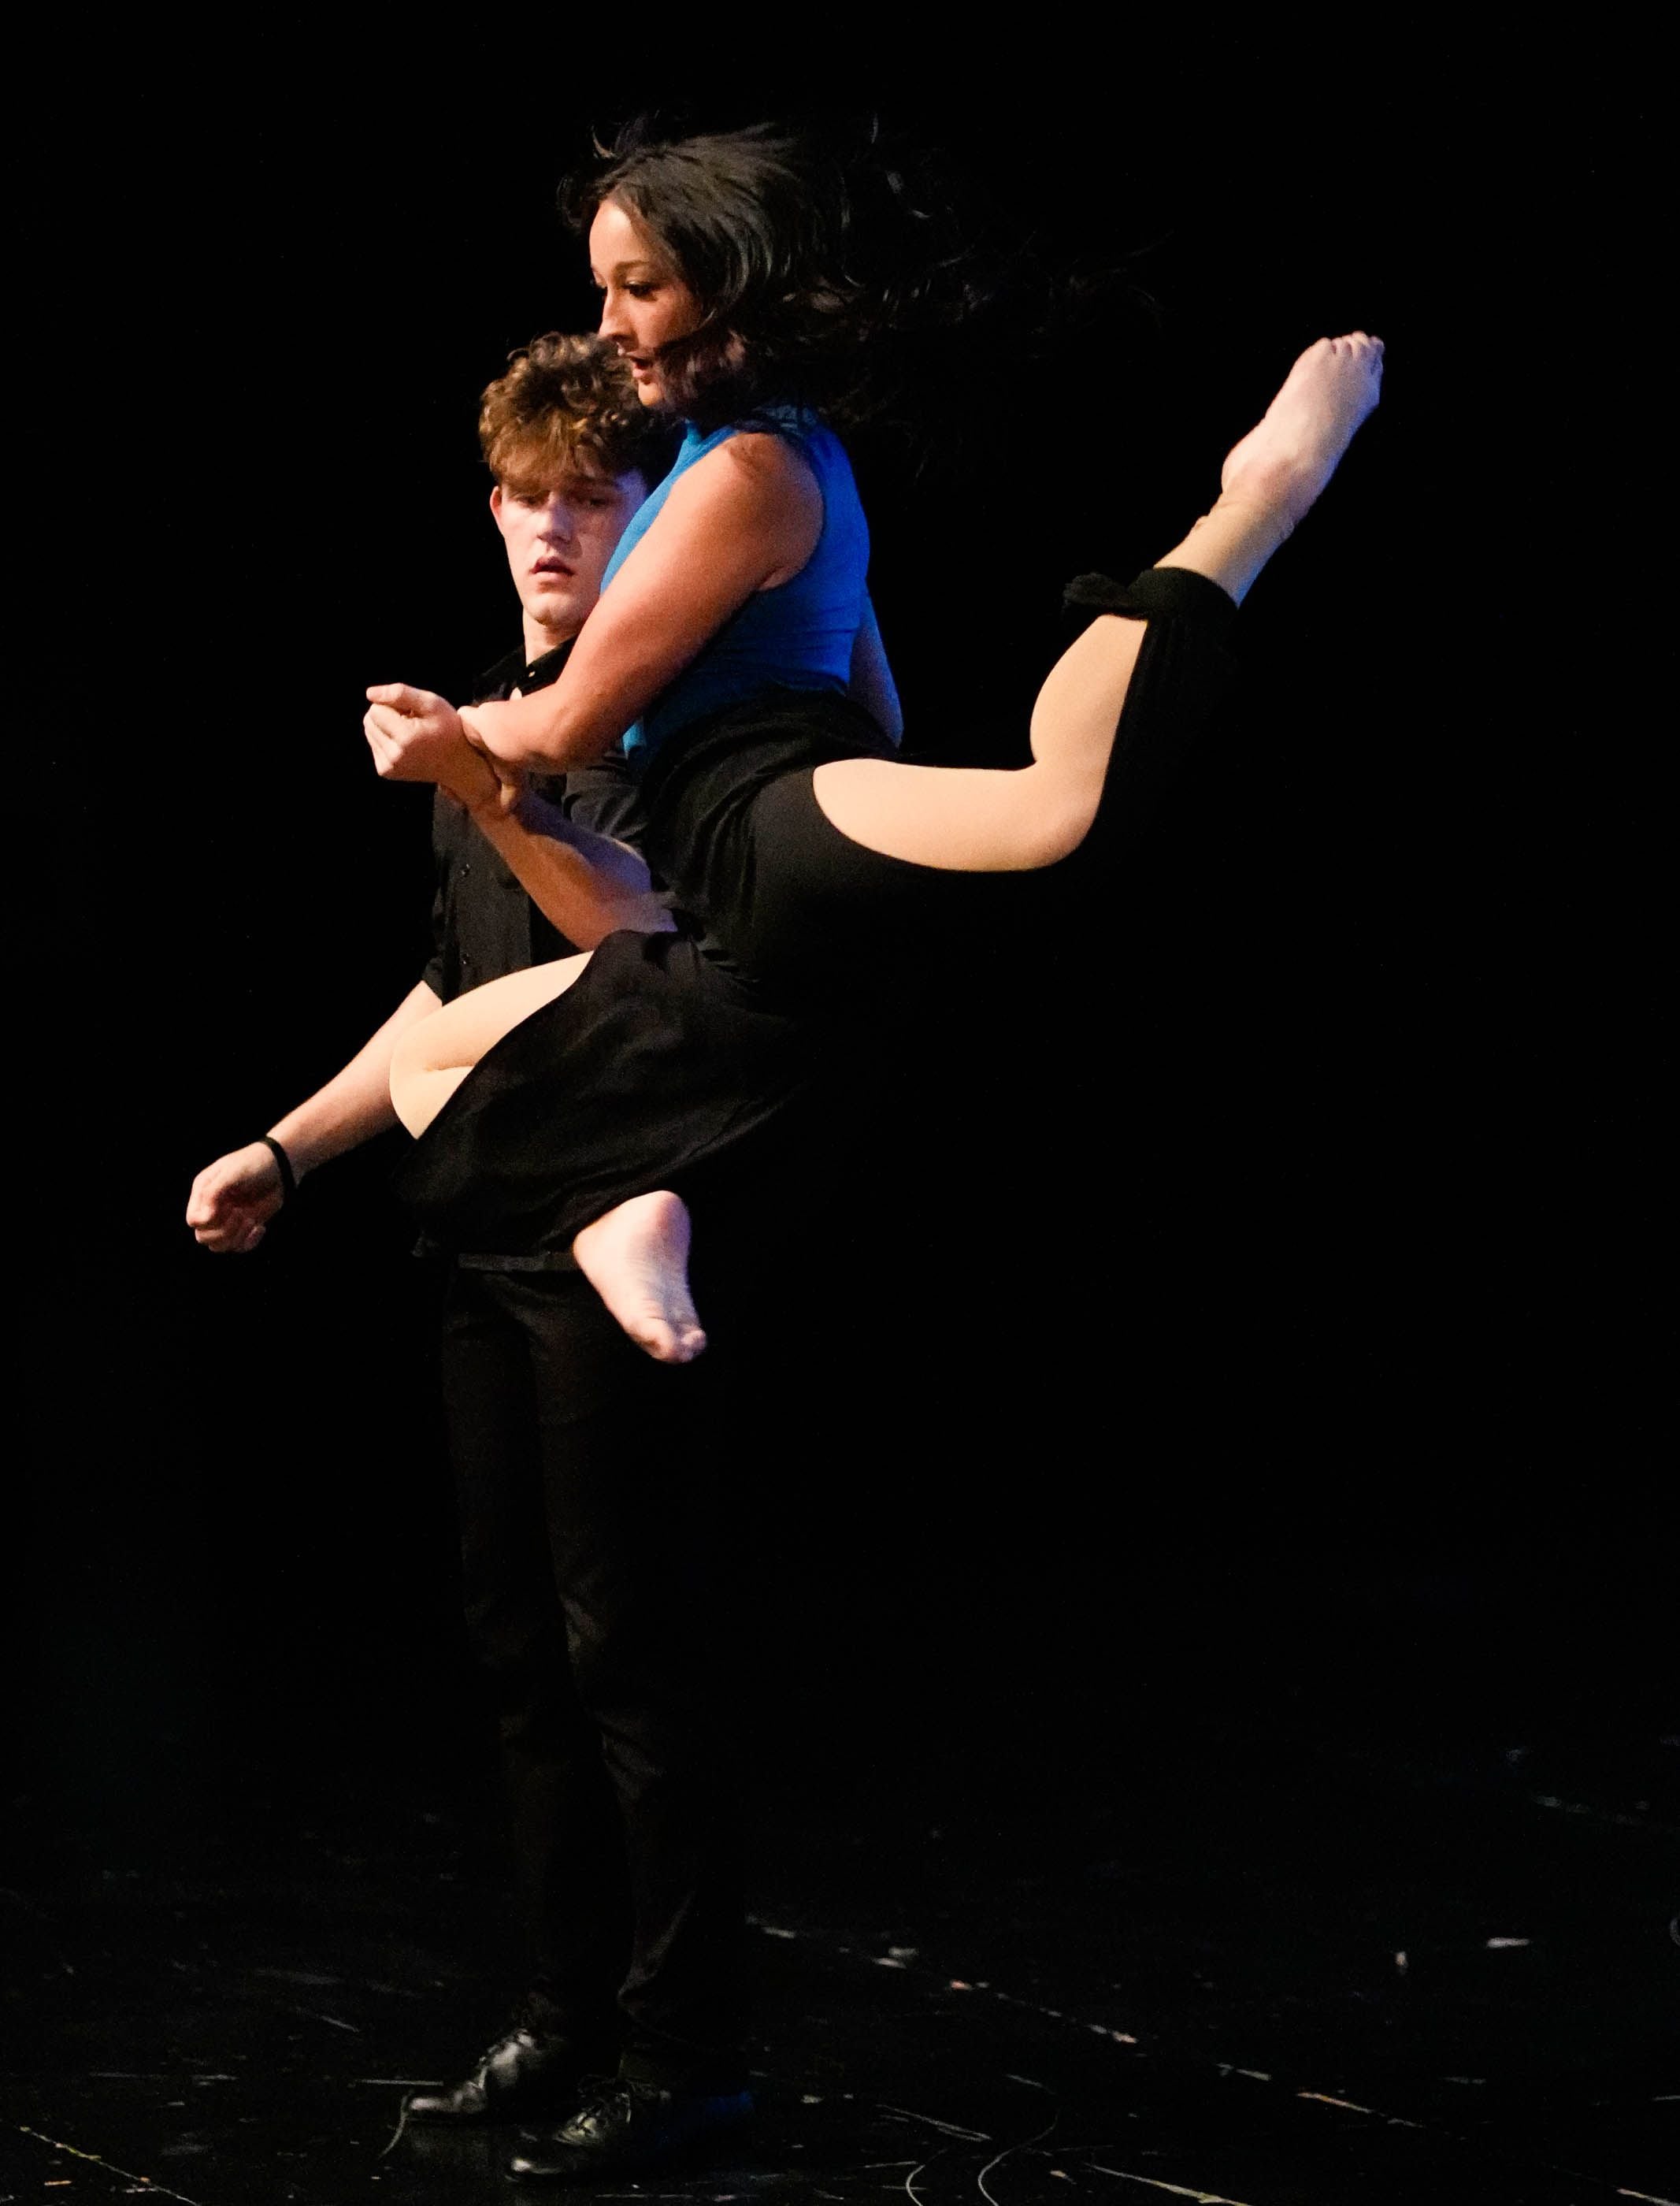 (Francisco Kjolseth | The Salt Lake Tribune) Nikkole Dong and dance partner Zachary Powell perform on stage at Grantsville High School during an end of year ballroom dance production on Thursday, May 4, 2023. Dong, 17, who has used dance to express herself since she was about 3, put her athleticism to test by joined the wrestling team, gaining strength and self-confidence in the process. 